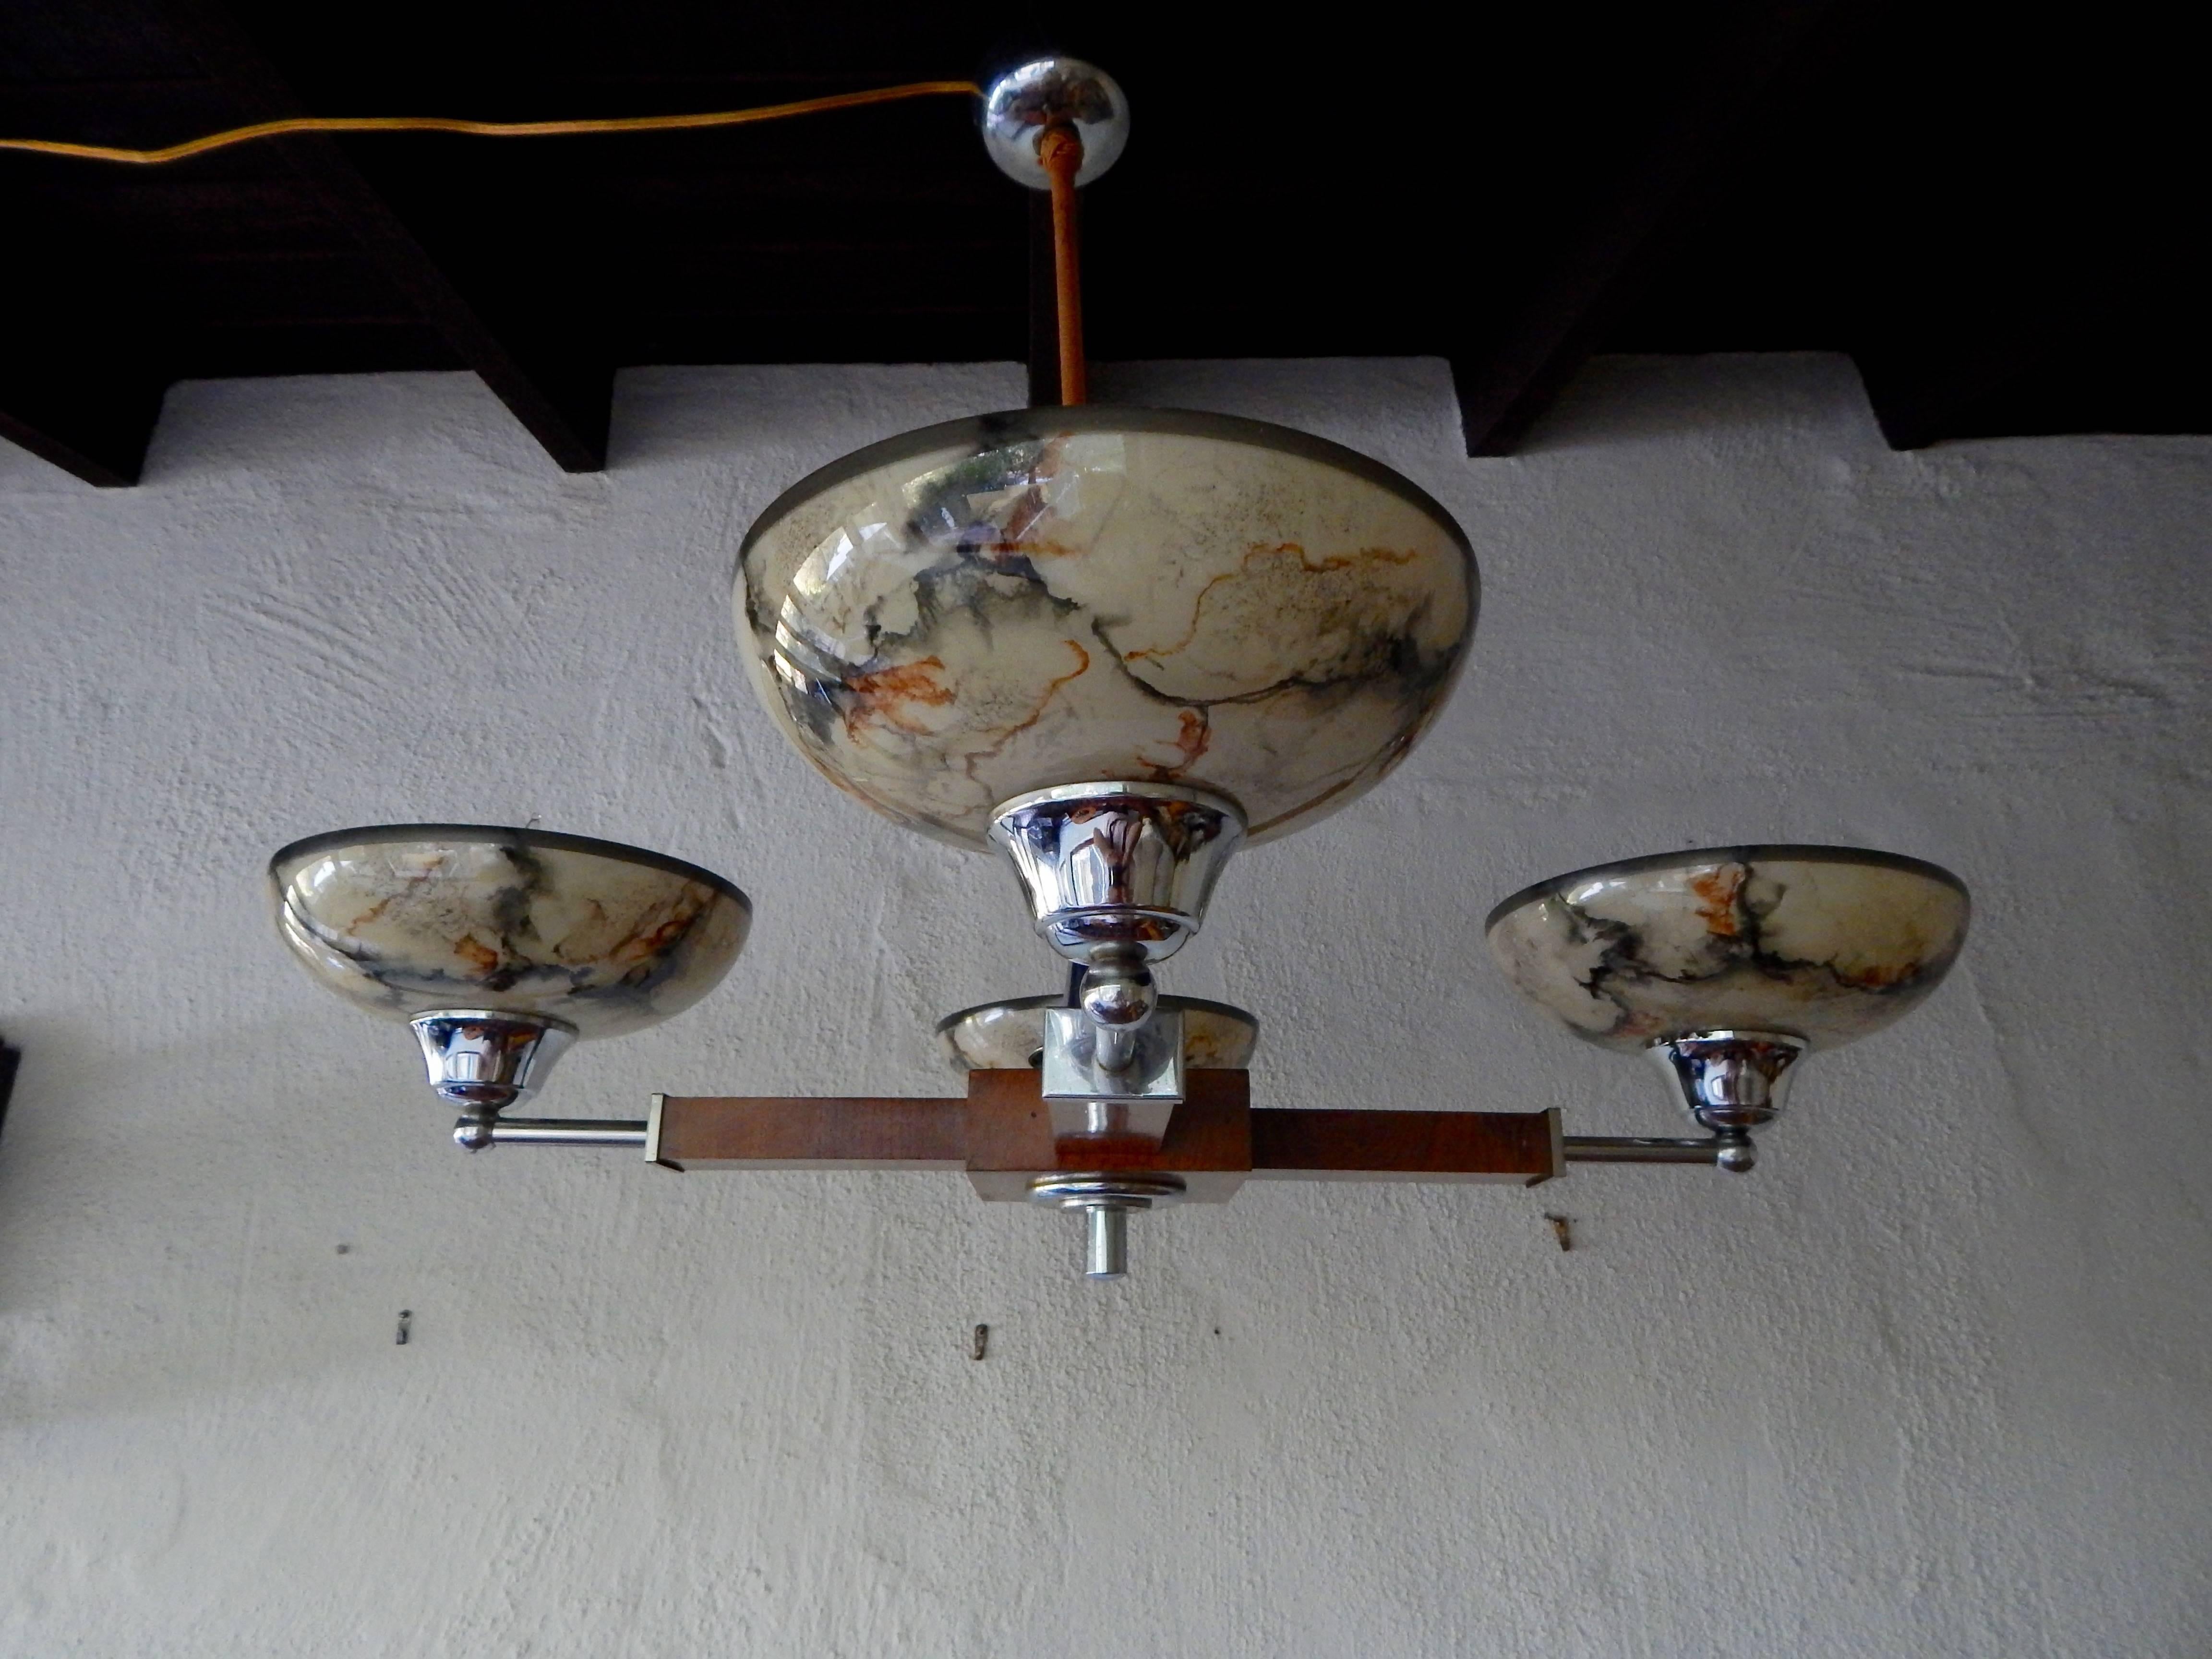 Swedish Mid-Century Modern four-arm hanging fixture in wood, chrome and glass ca 1950. Freshly re-wired for use in the USA. Shades in marbleized glass. Contact us with any questions.